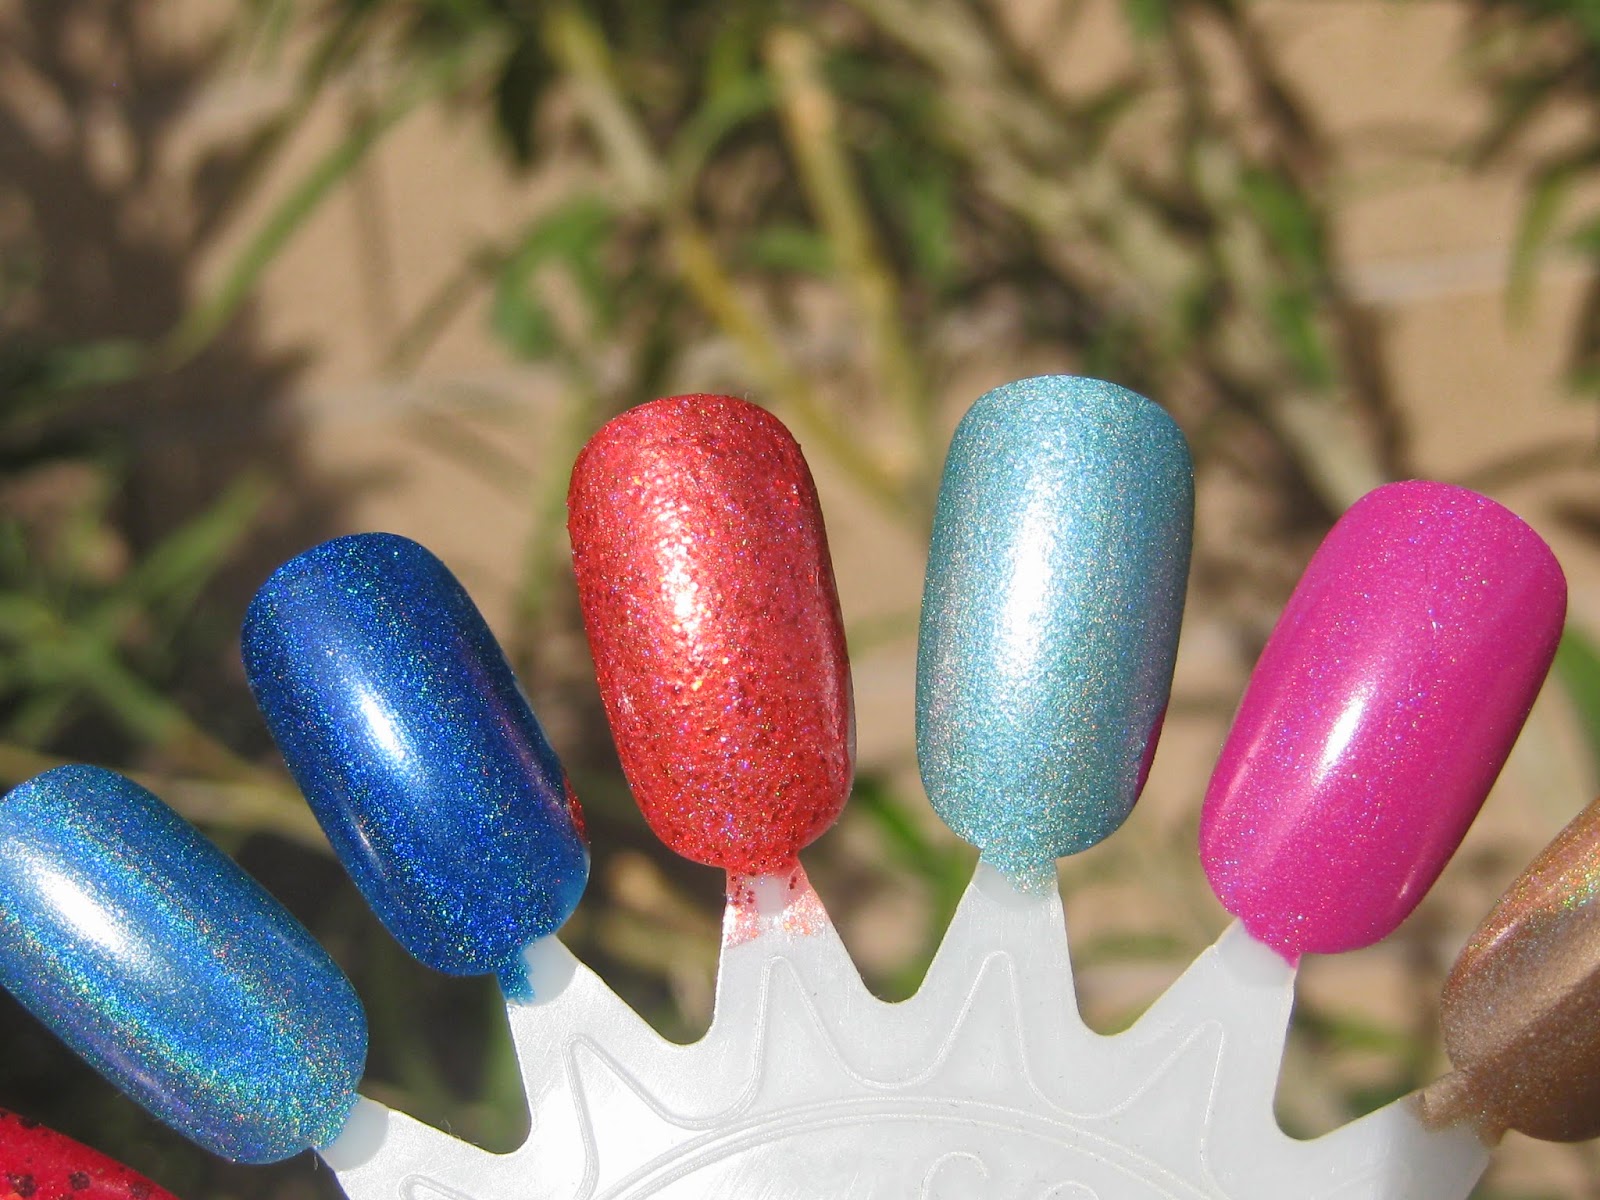 4. "Indie Nail Lacquer Shades" - wide 10